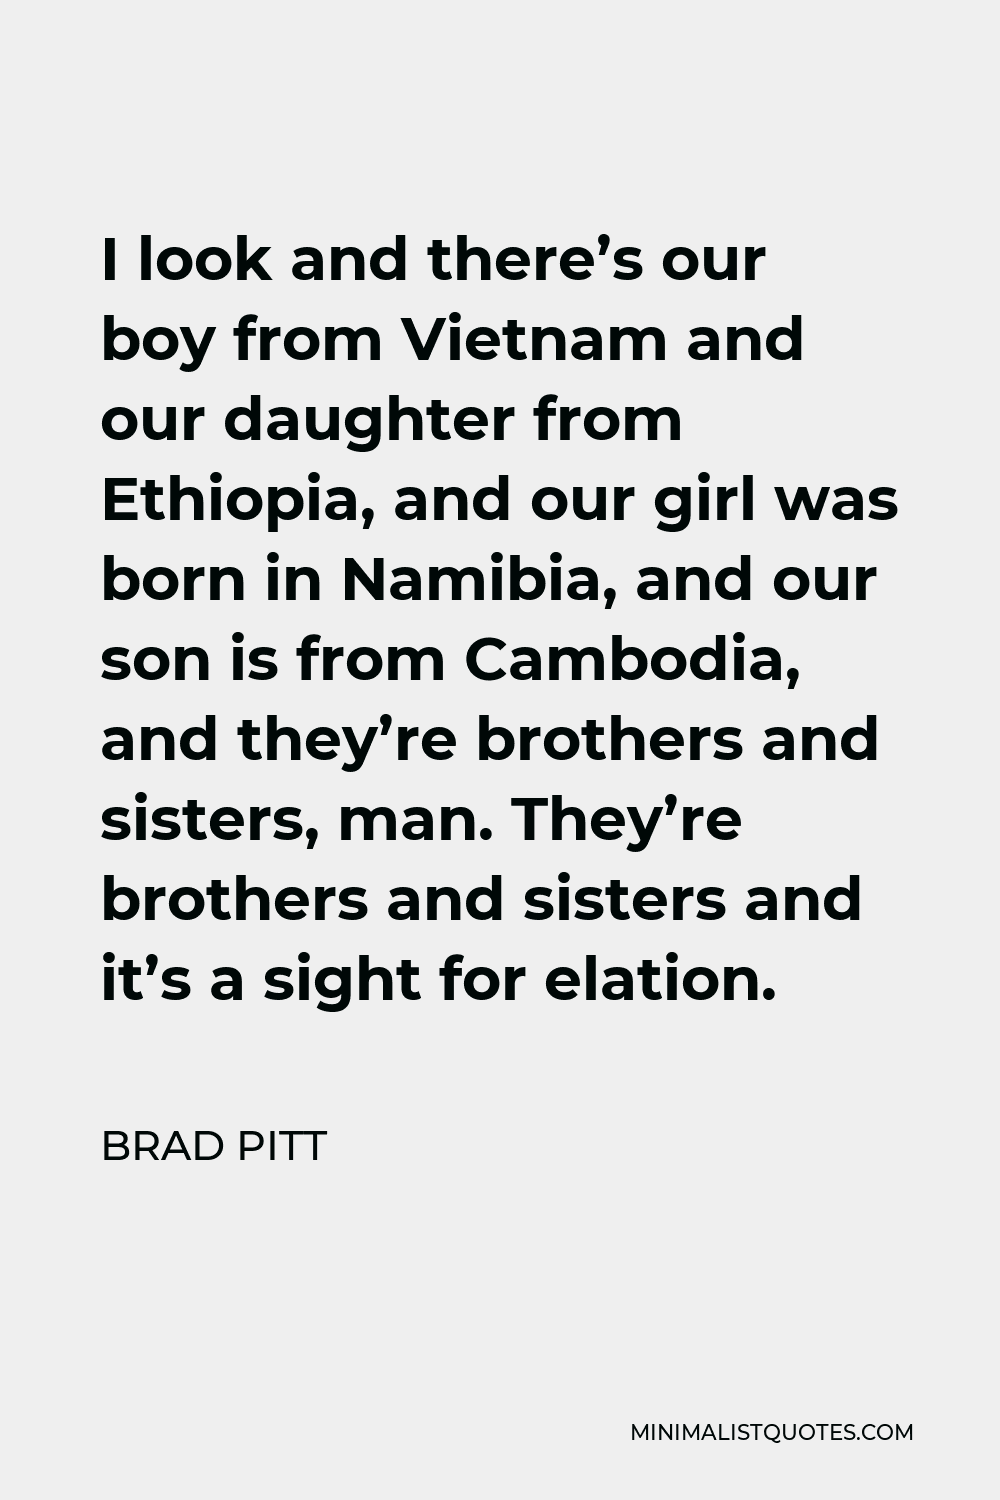 Brad Pitt Quote - I look and there’s our boy from Vietnam and our daughter from Ethiopia, and our girl was born in Namibia, and our son is from Cambodia, and they’re brothers and sisters, man. They’re brothers and sisters and it’s a sight for elation.